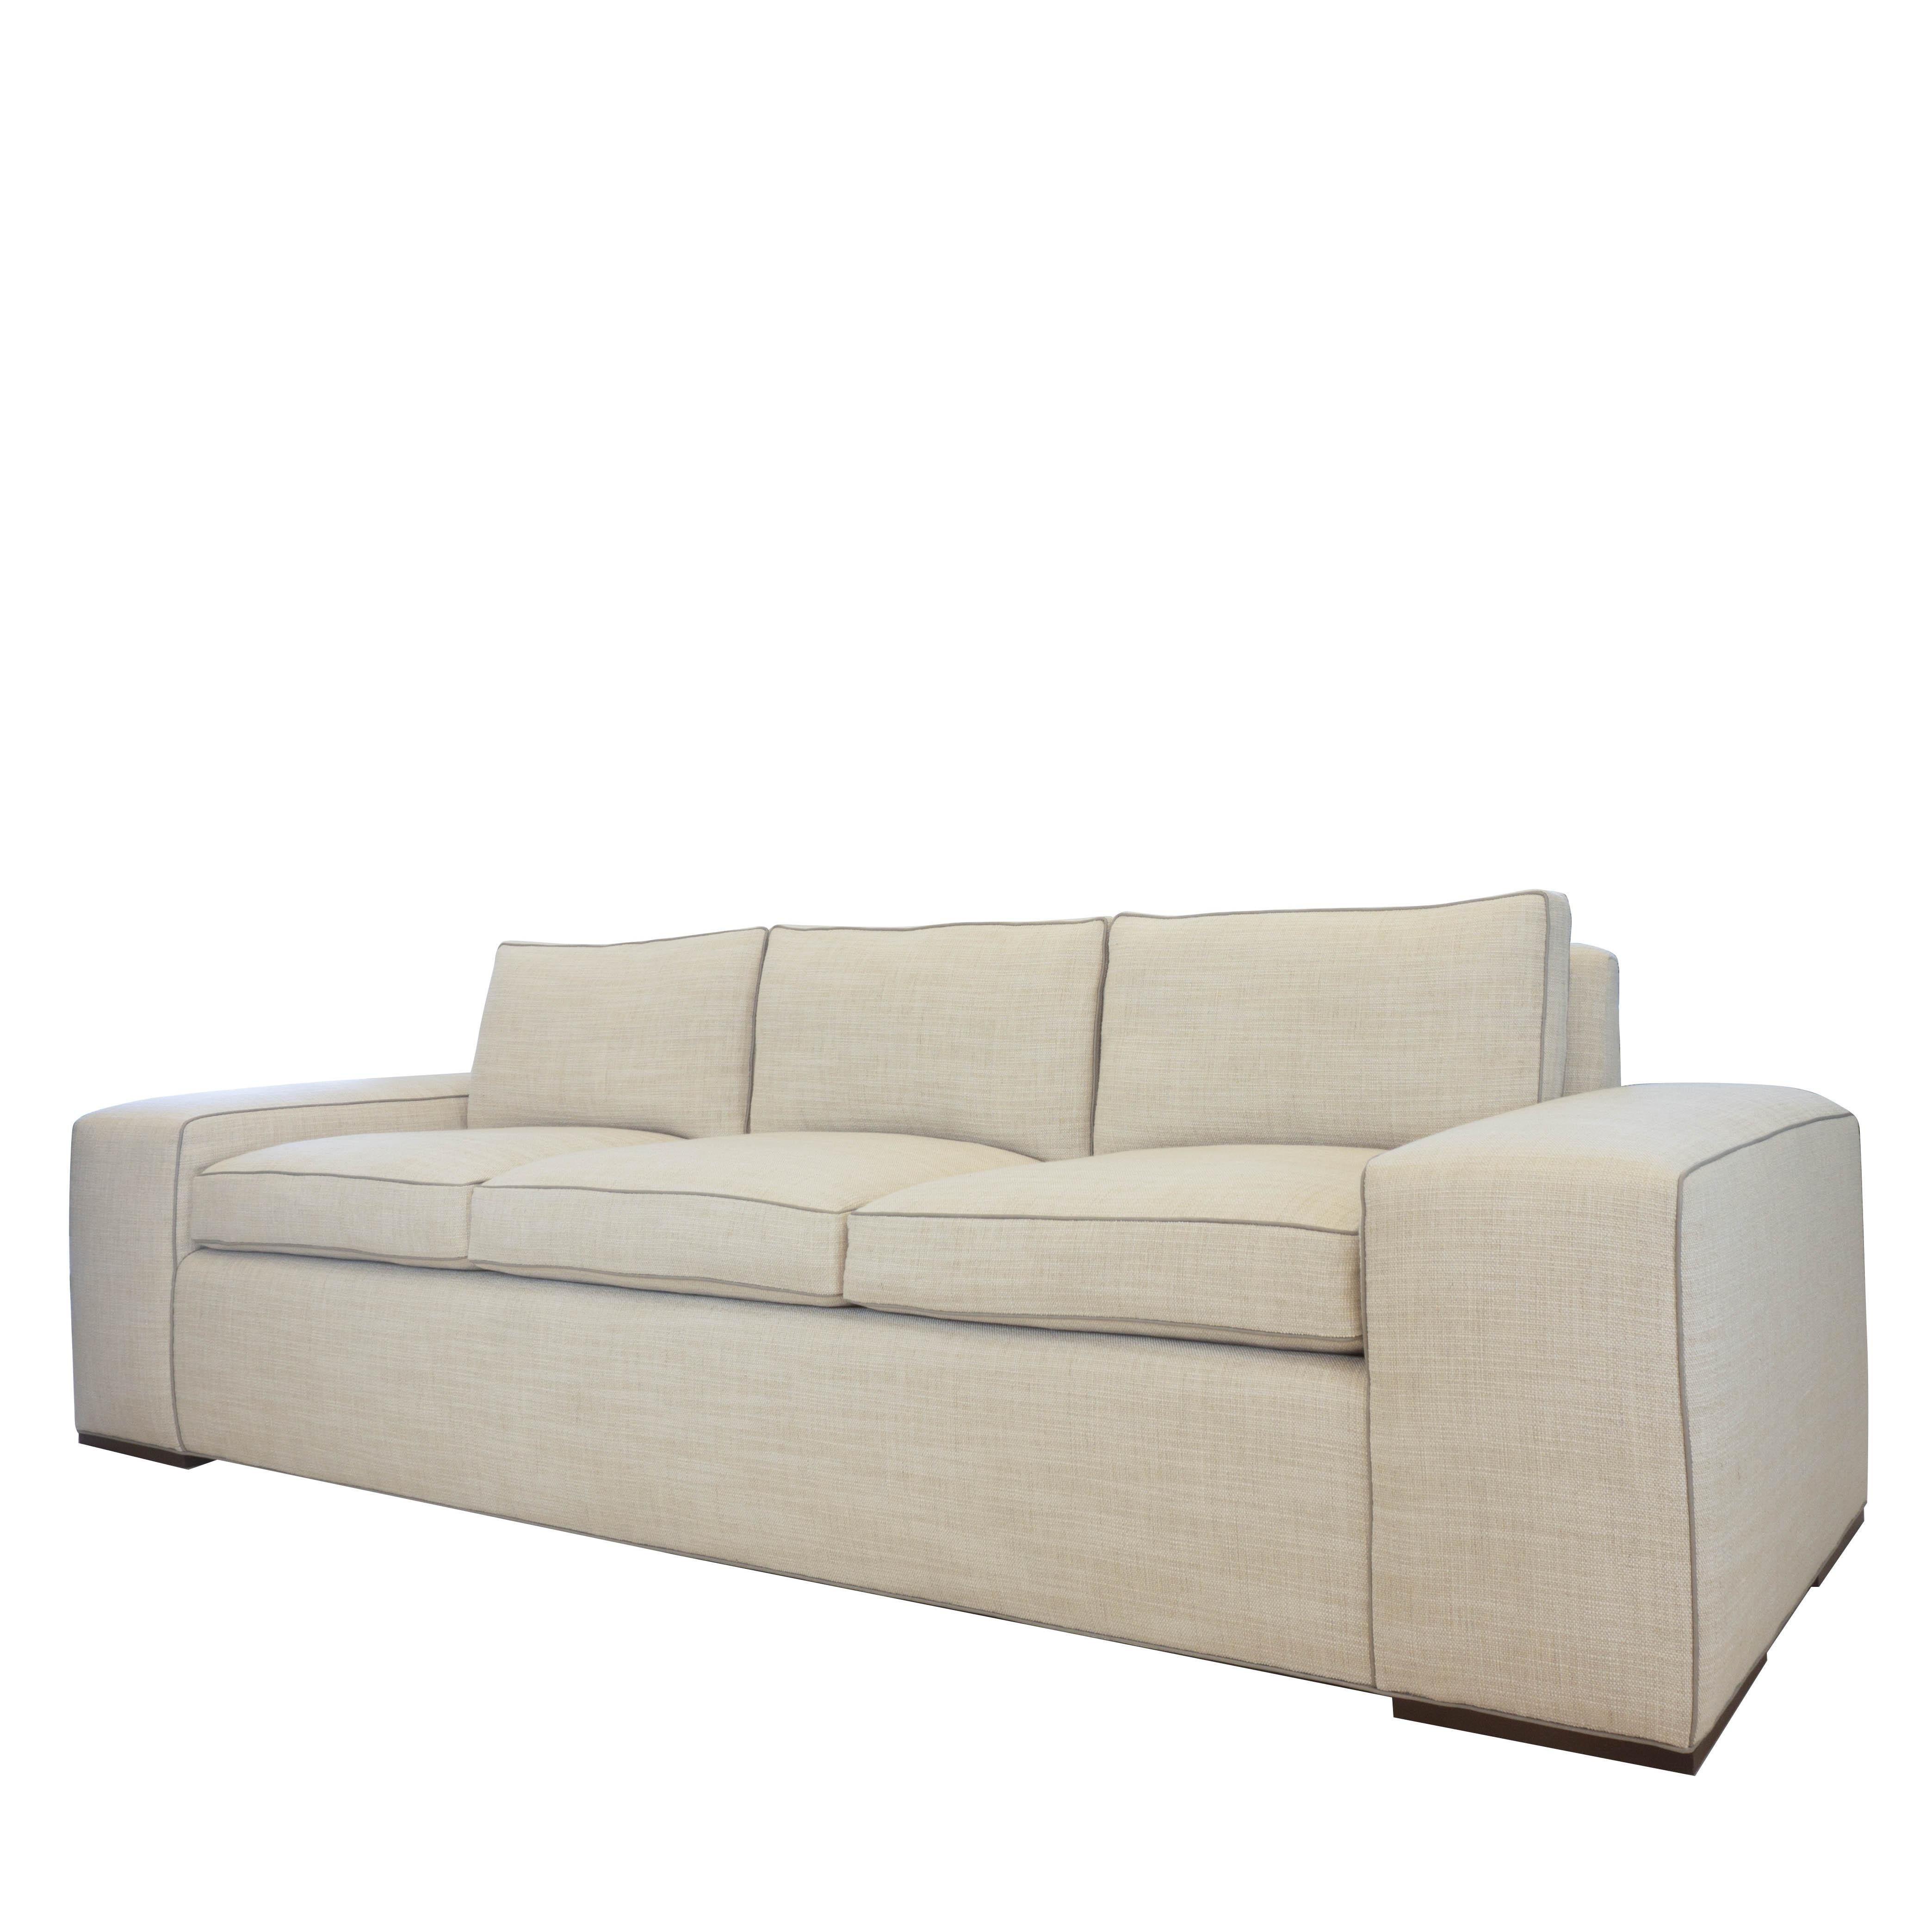 American Contemporary Square Arm Sofa with Loose Cushions For Sale